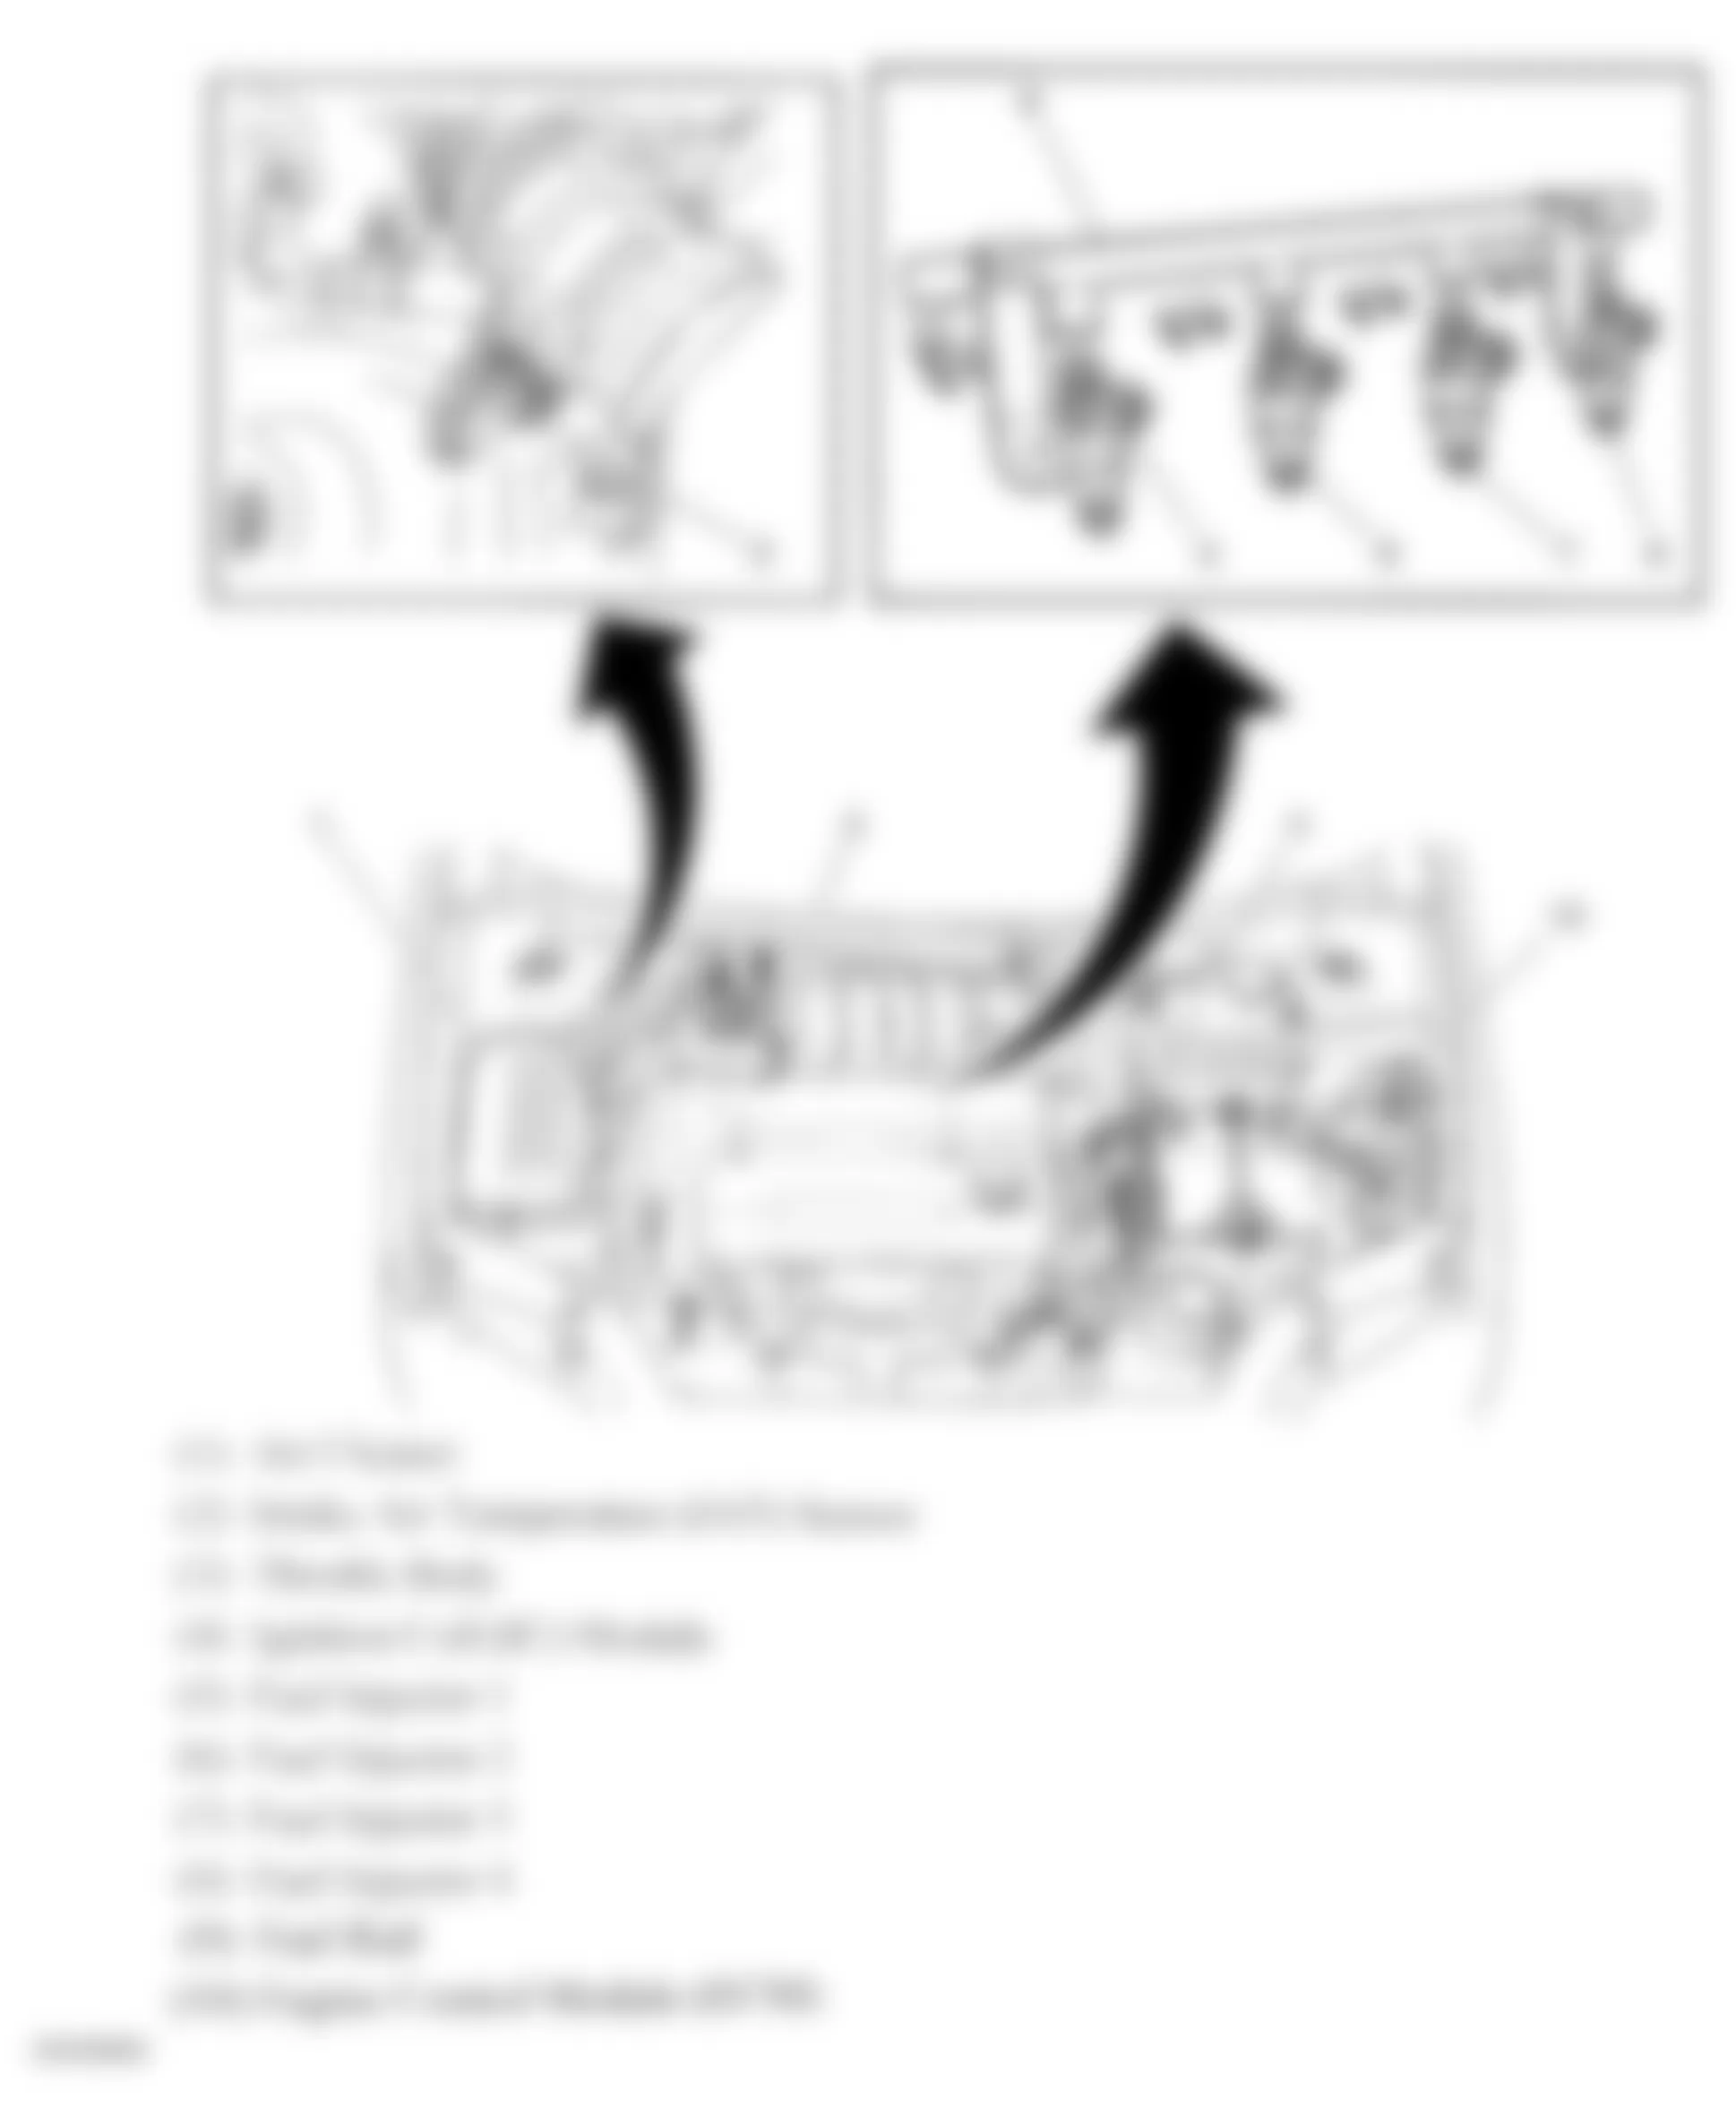 Chevrolet Aveo LT 2006 - Component Locations -  Engine Compartment